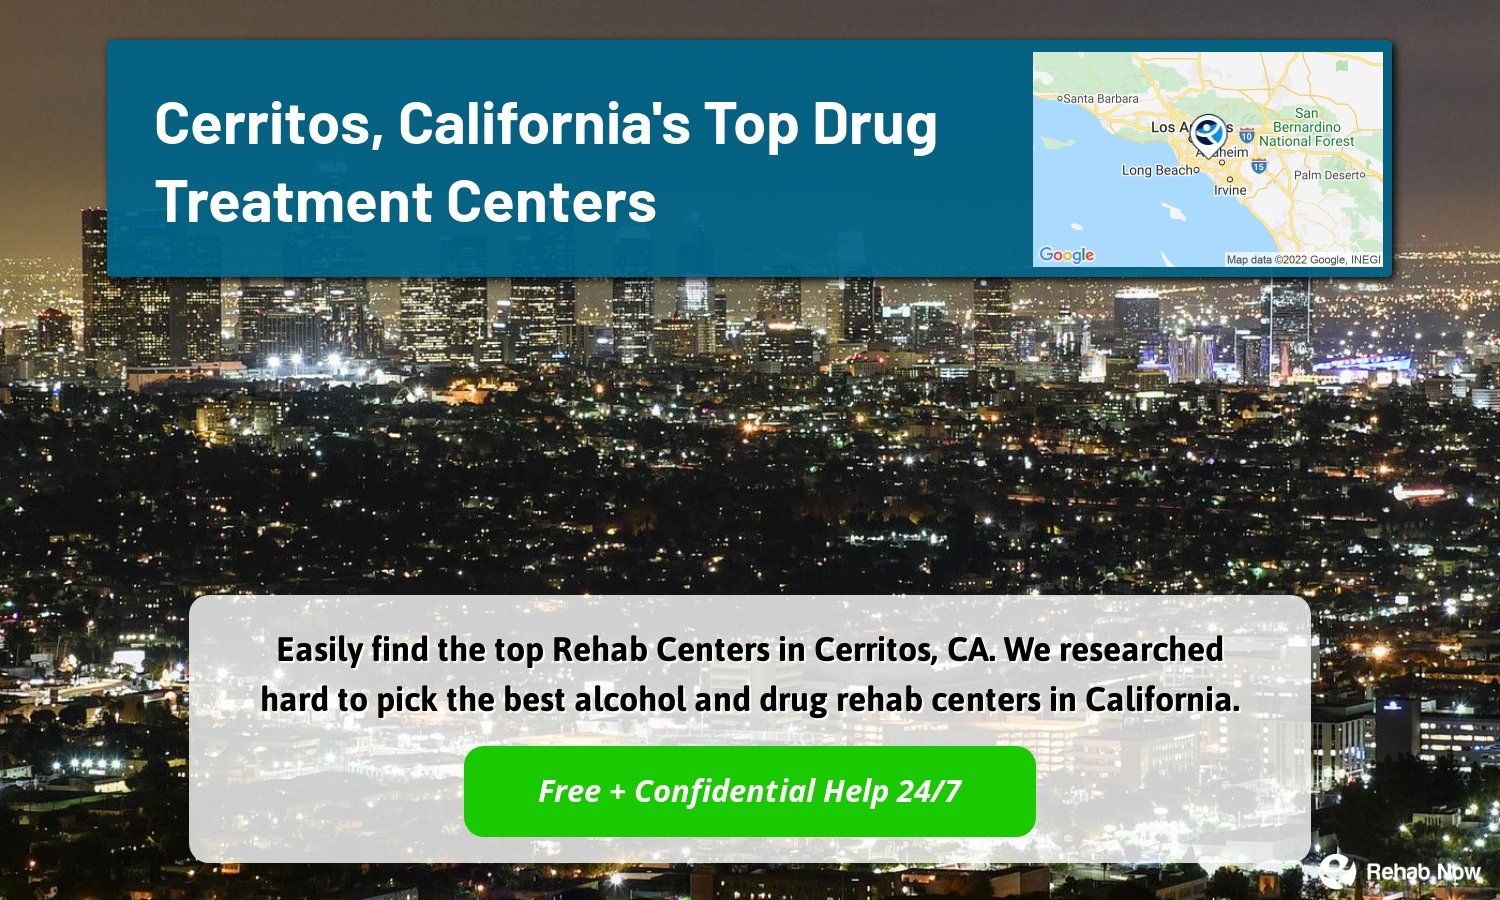 Easily find the top Rehab Centers in Cerritos, CA. We researched hard to pick the best alcohol and drug rehab centers in California.